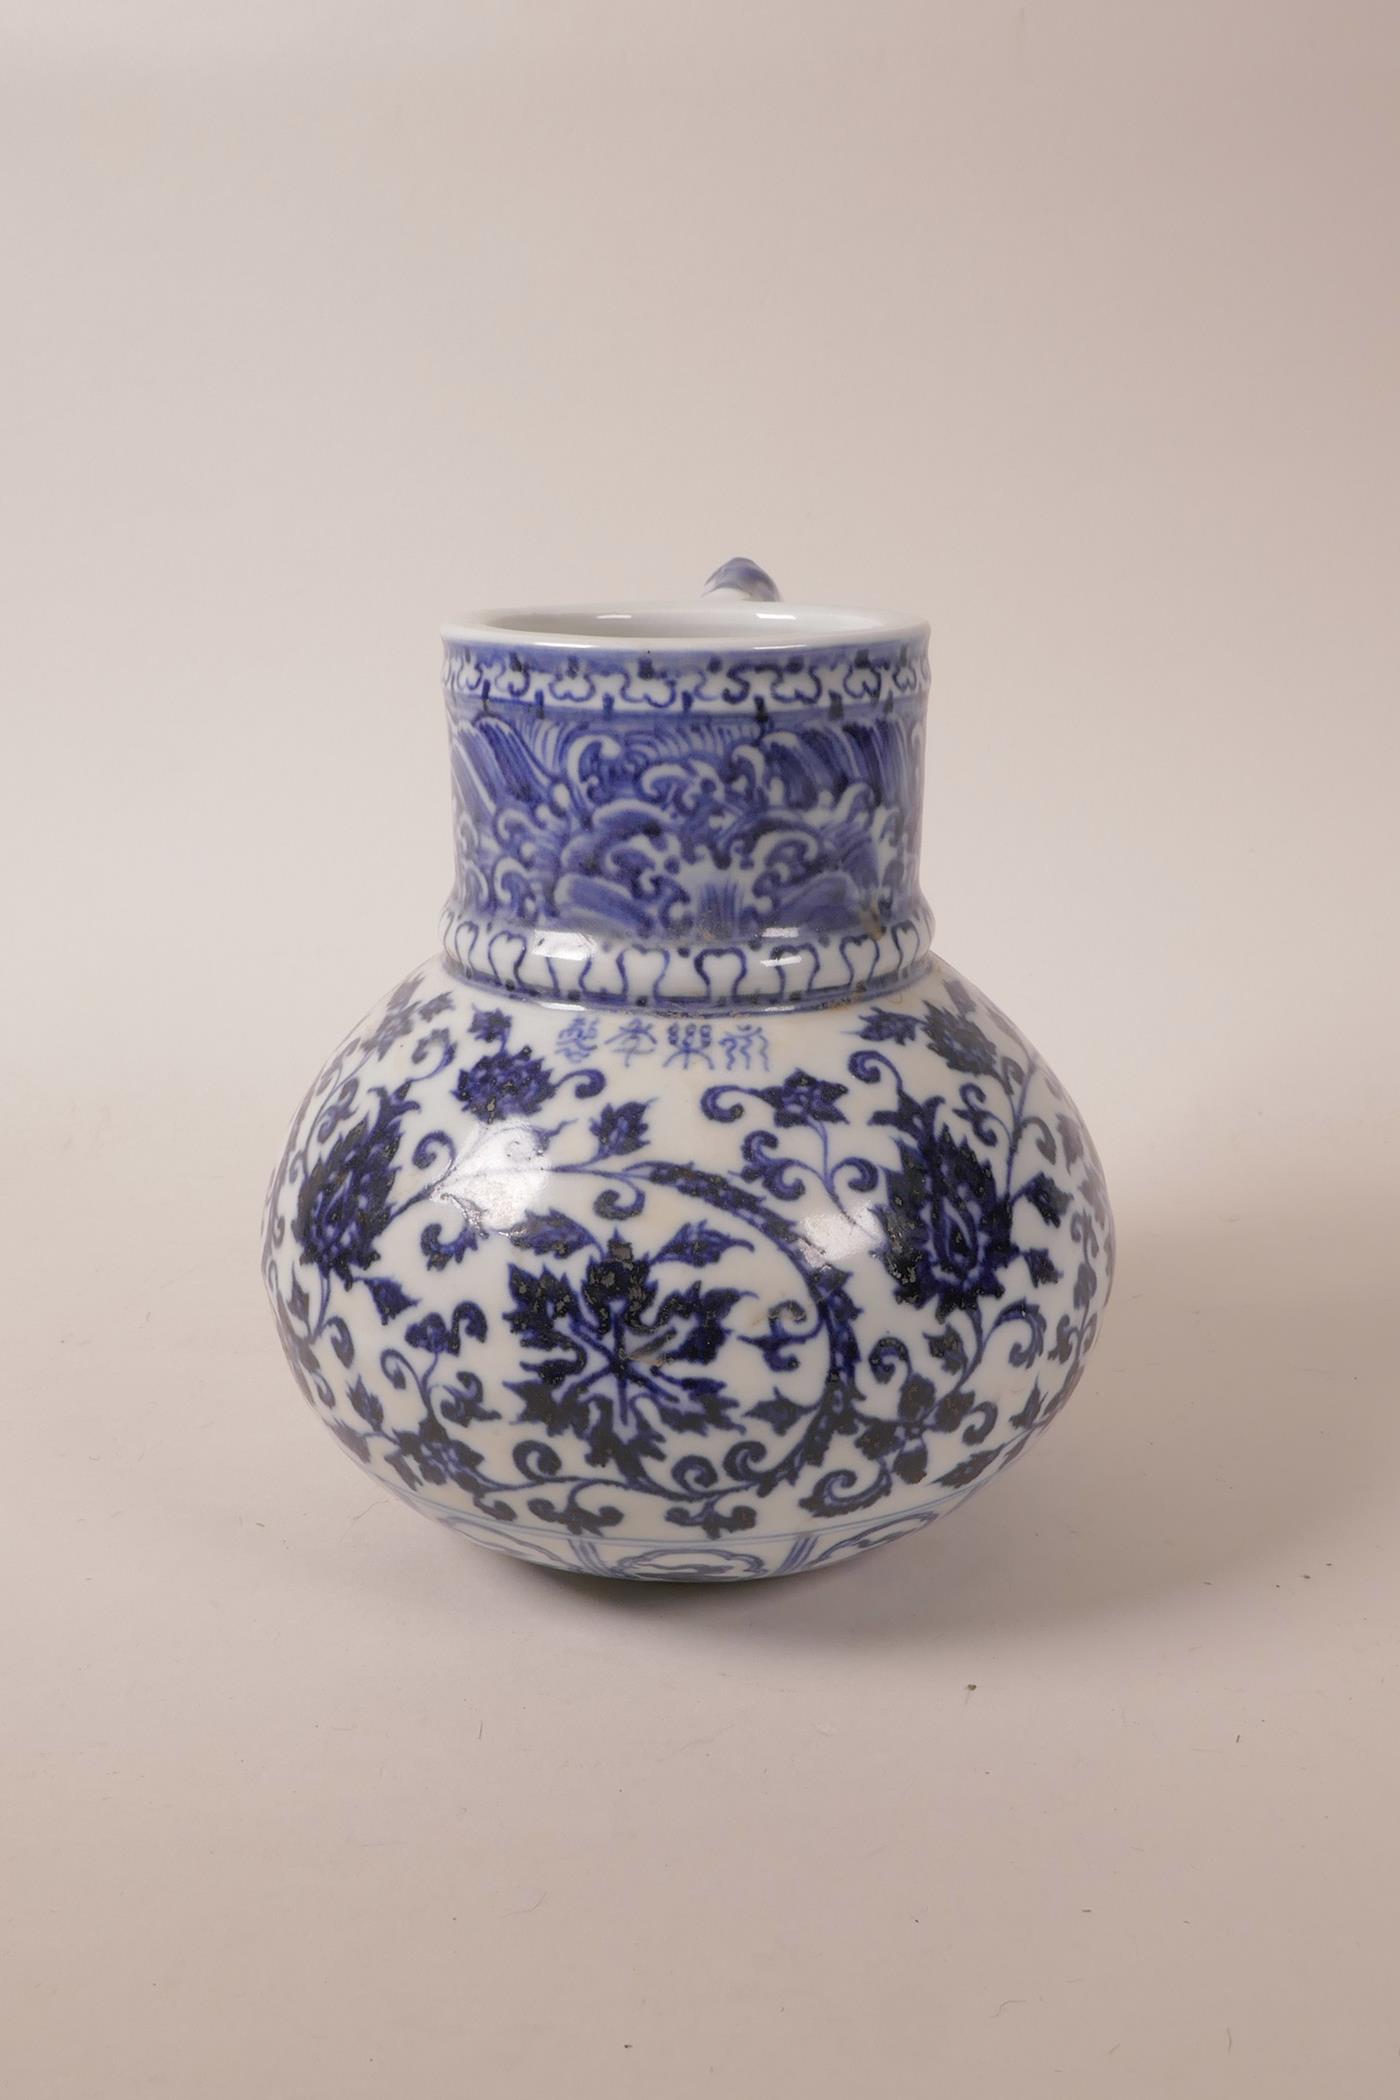 A Chinese blue and white porcelain wine jug with scrolling lotus flower decoration, 4 character mark - Image 2 of 5